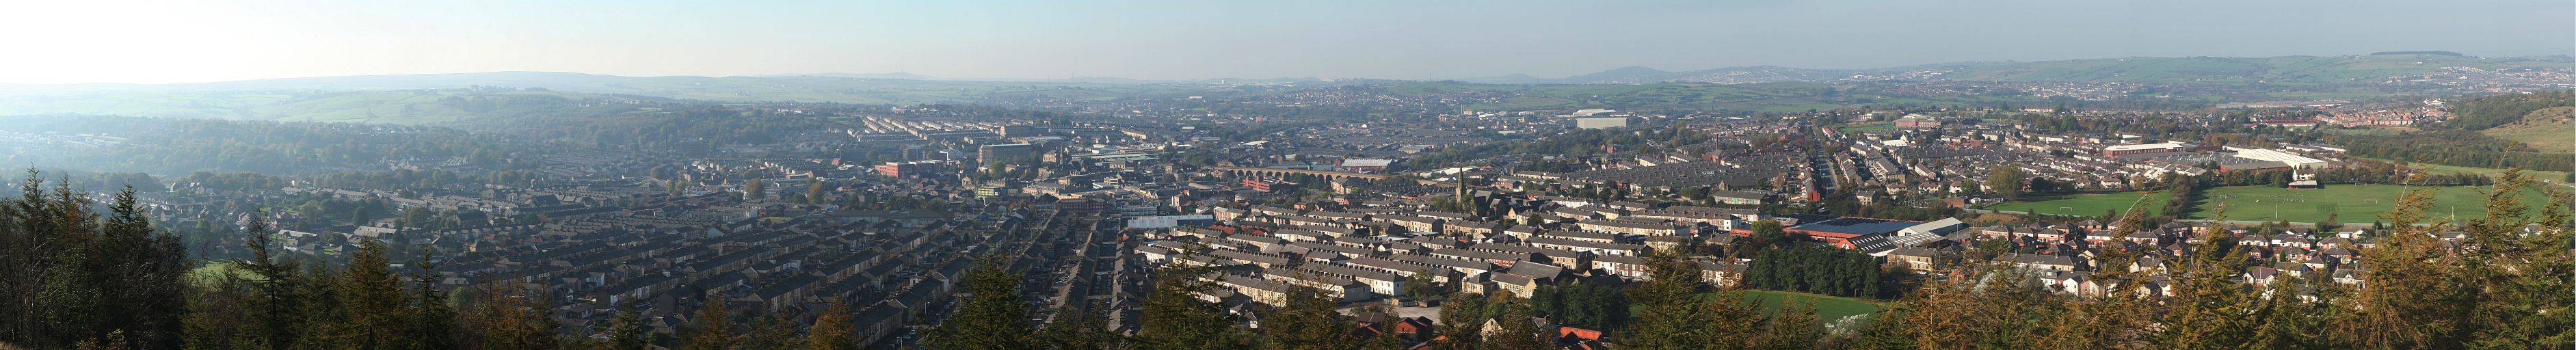 Sunny panorama of Accrington, Lancashire from the Hillock Vale